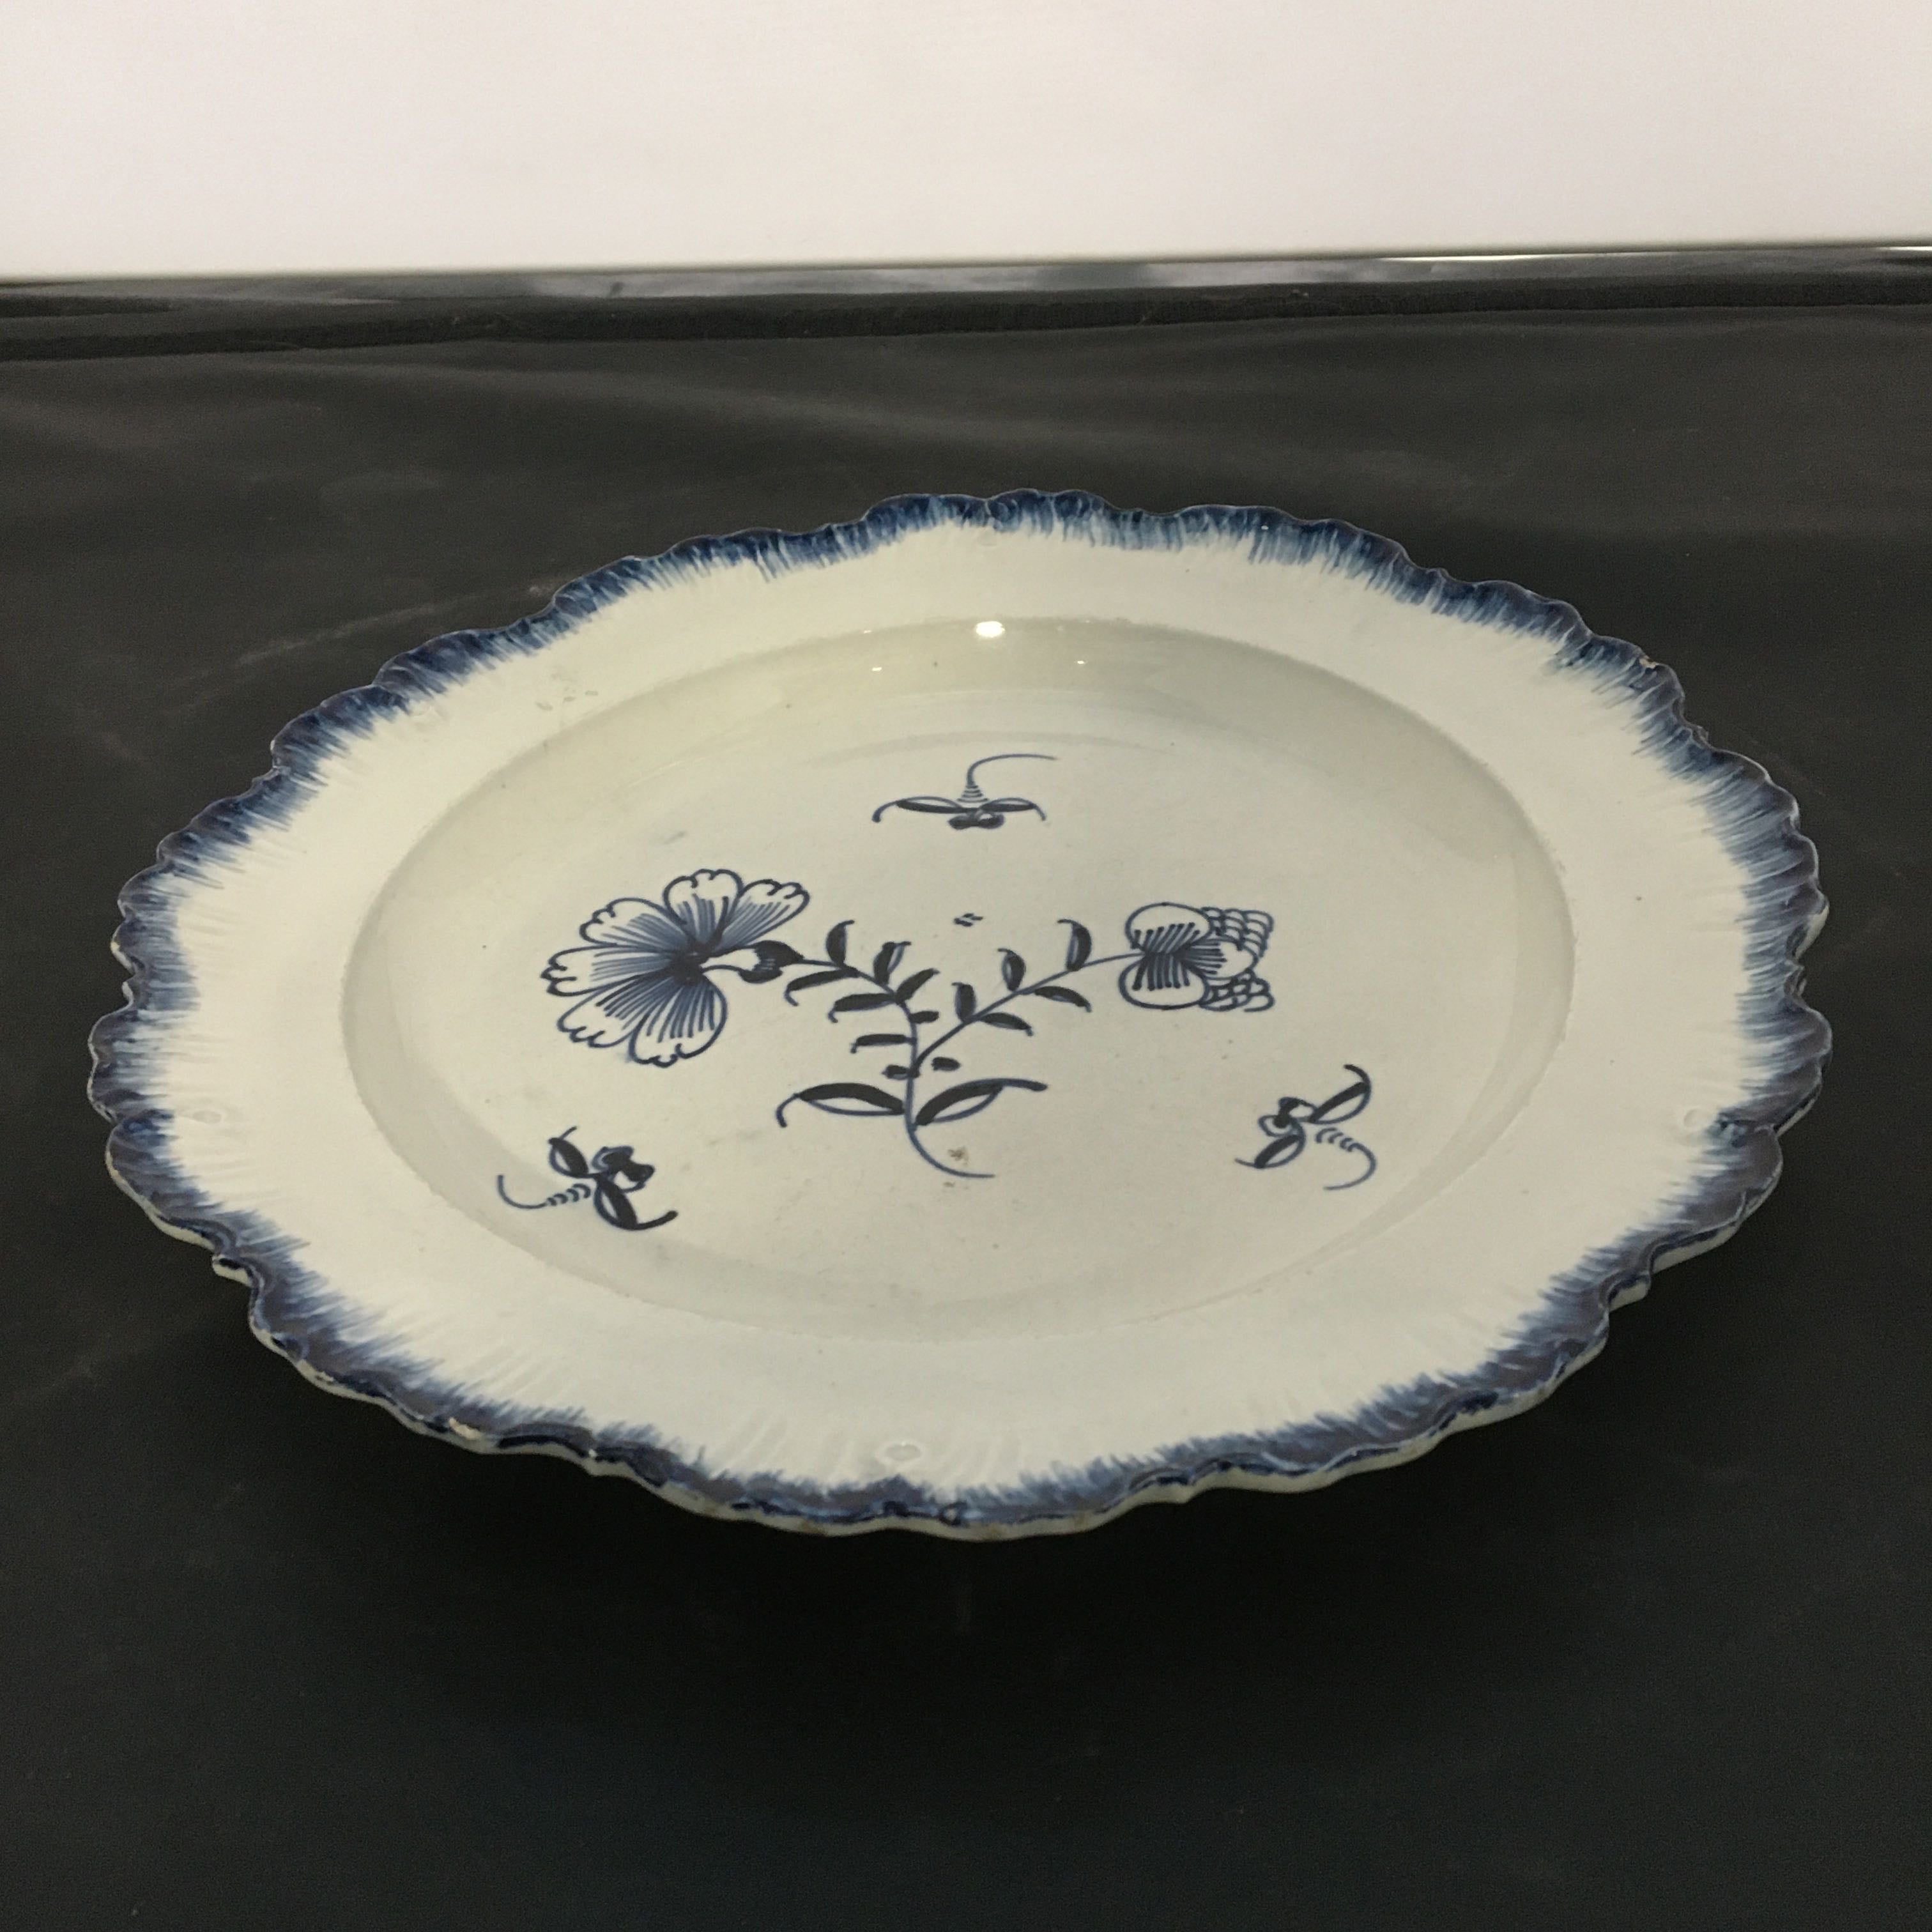 Antique Pearlware 10" Plate Leeds Blue Feather Edge 18th Century Staffordshire